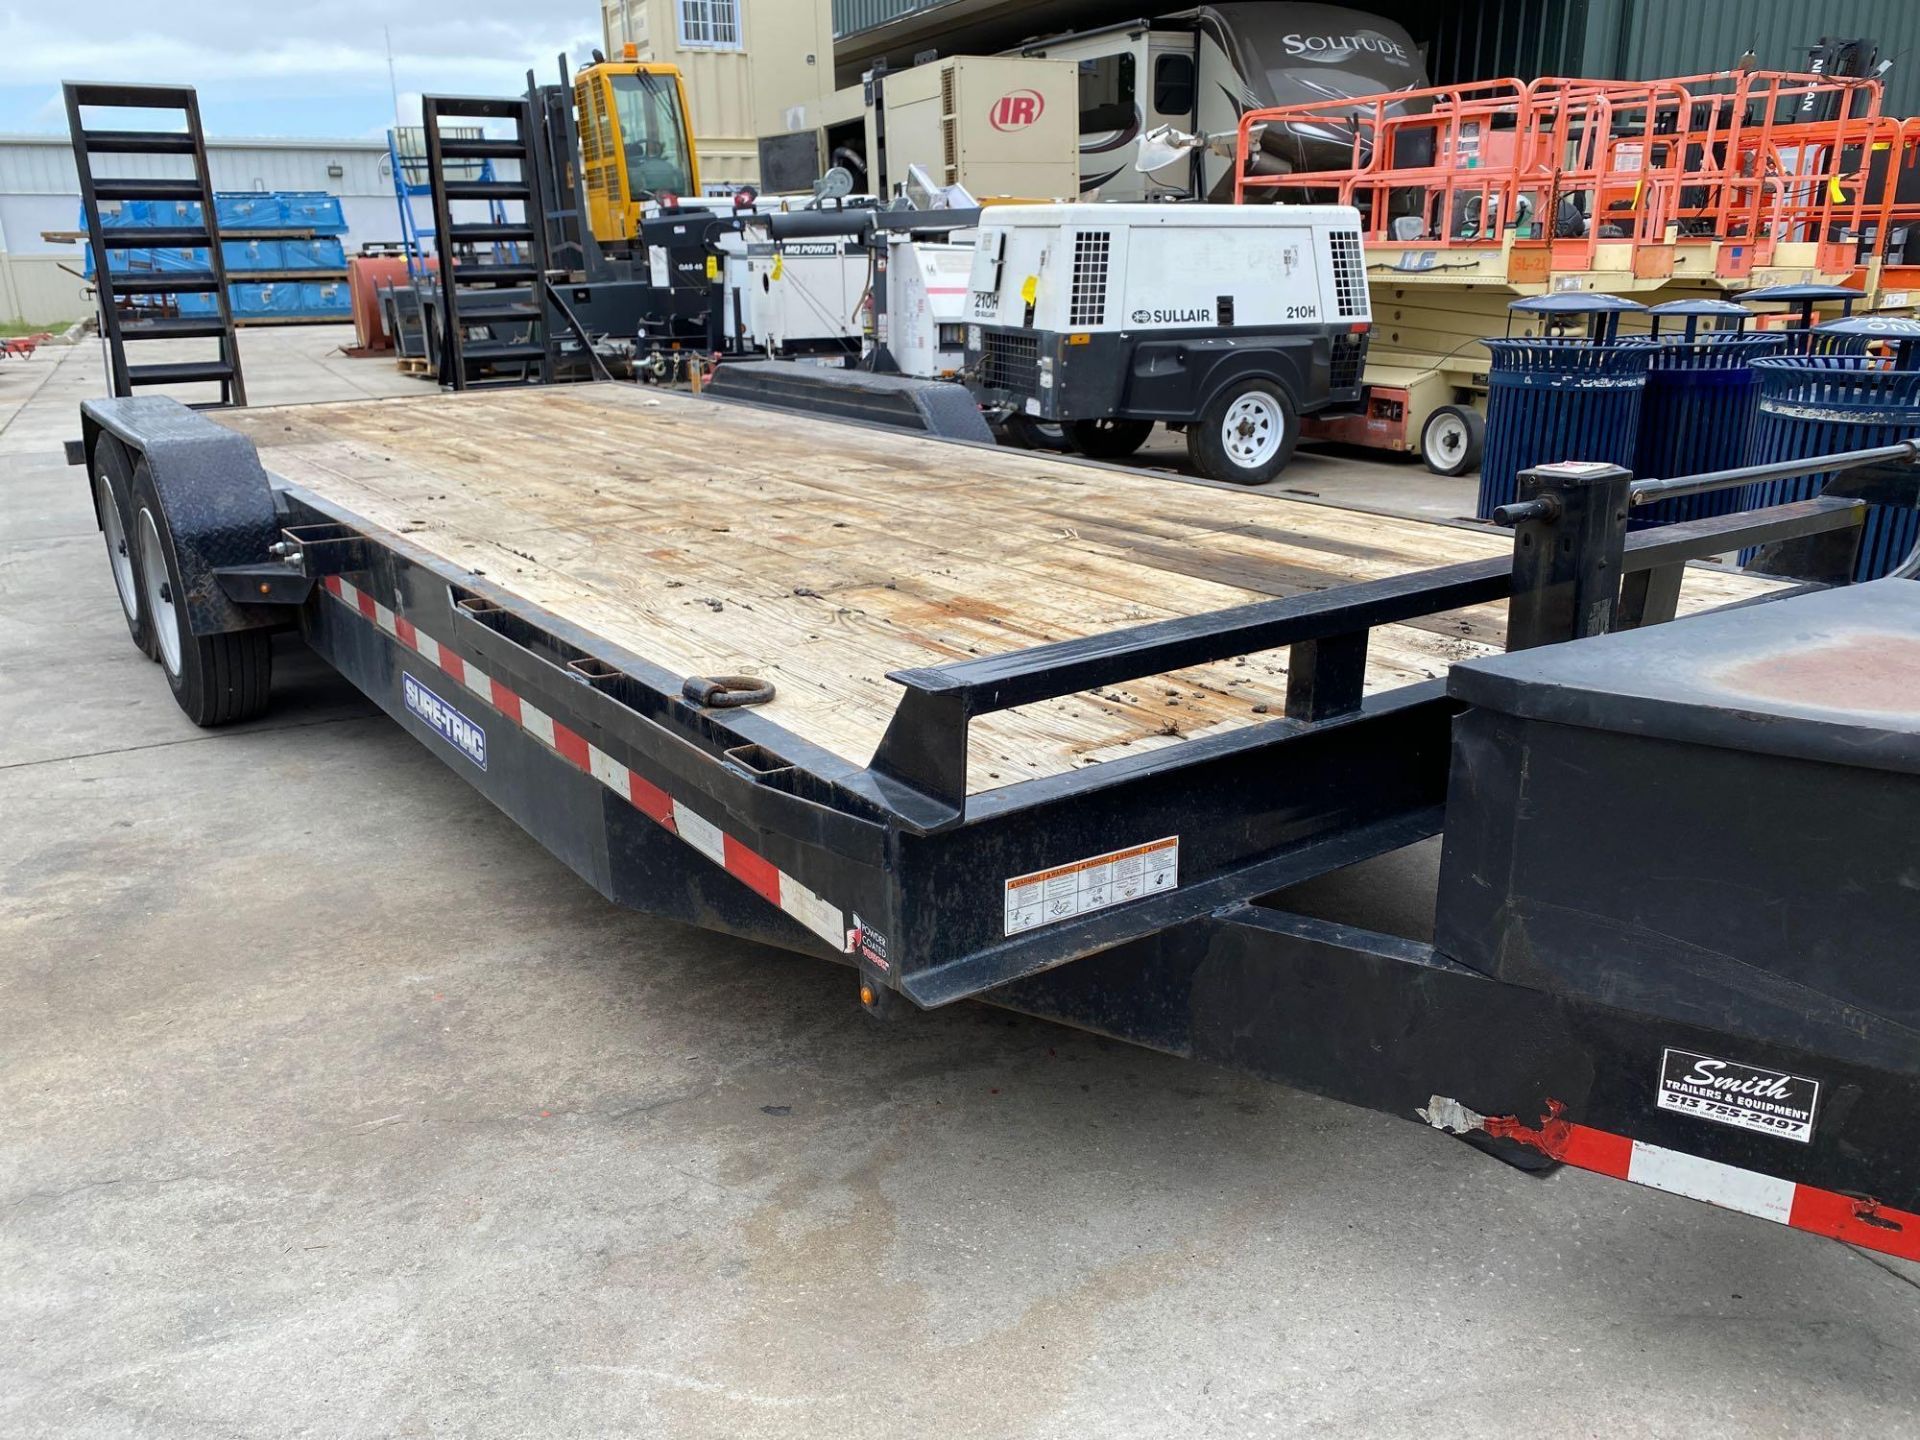 2018 SURE-TRAC DUAL AXLE TRAILER WITH FOLD DOWN RAMPS, 16,000 GVWR - Image 20 of 22